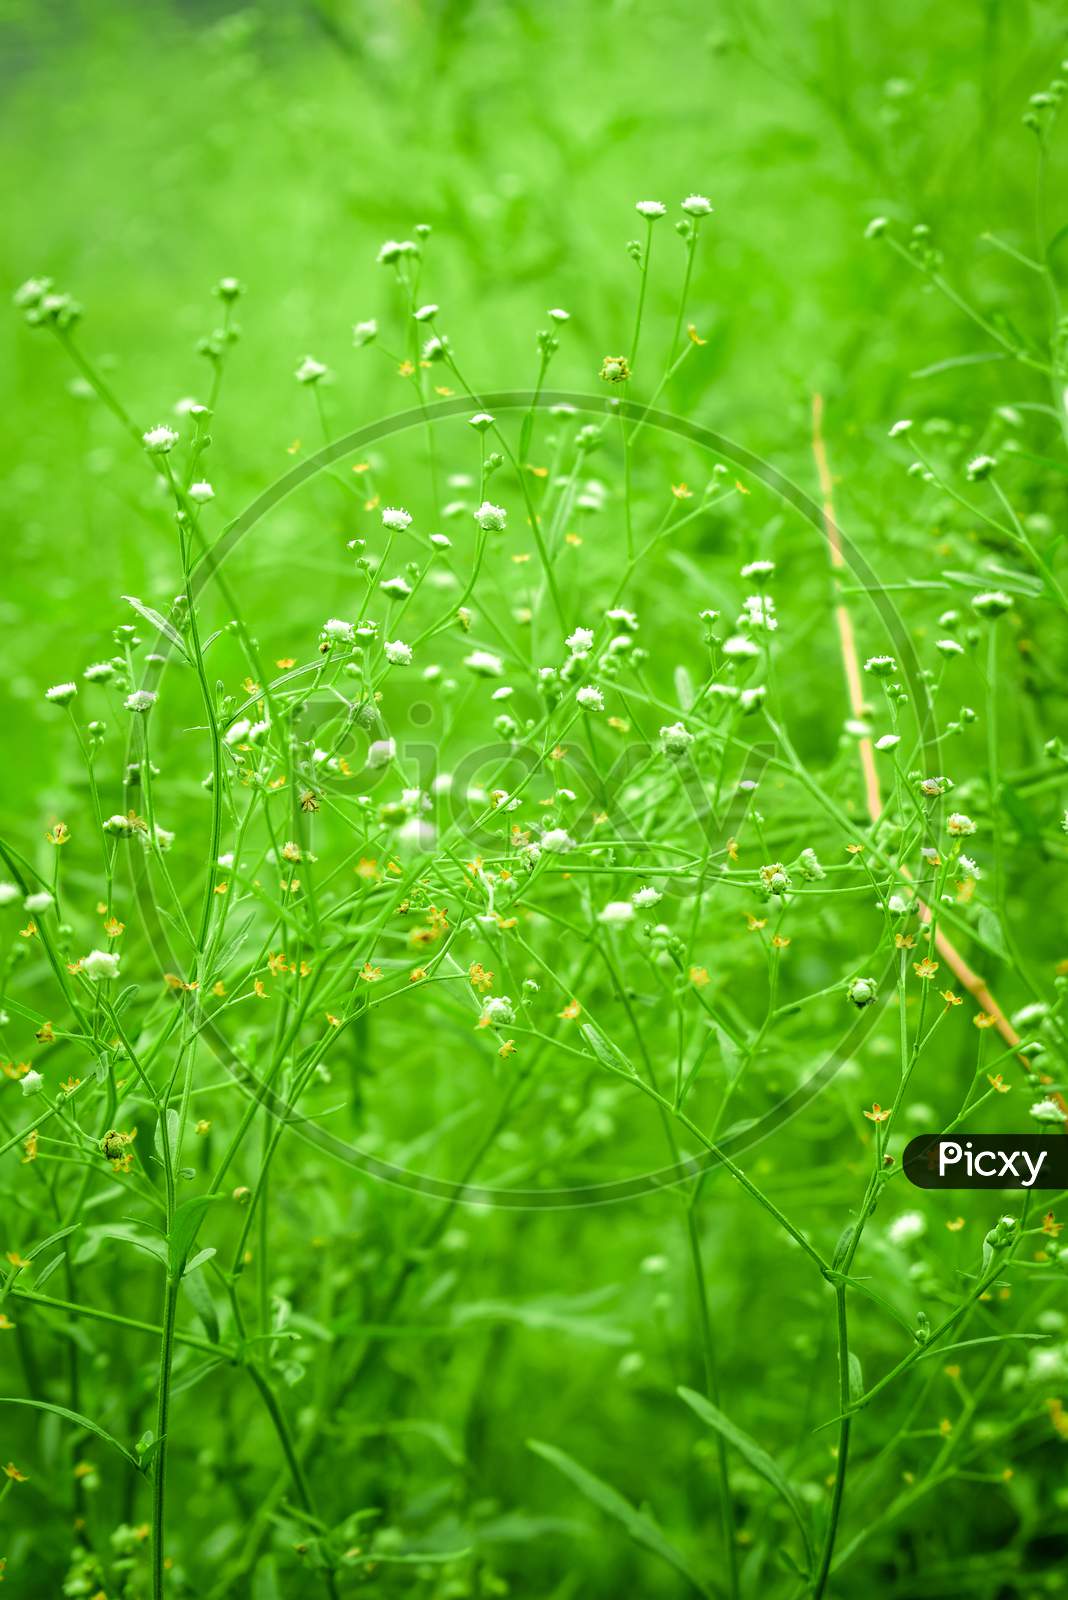 Green grass with small white flowers.